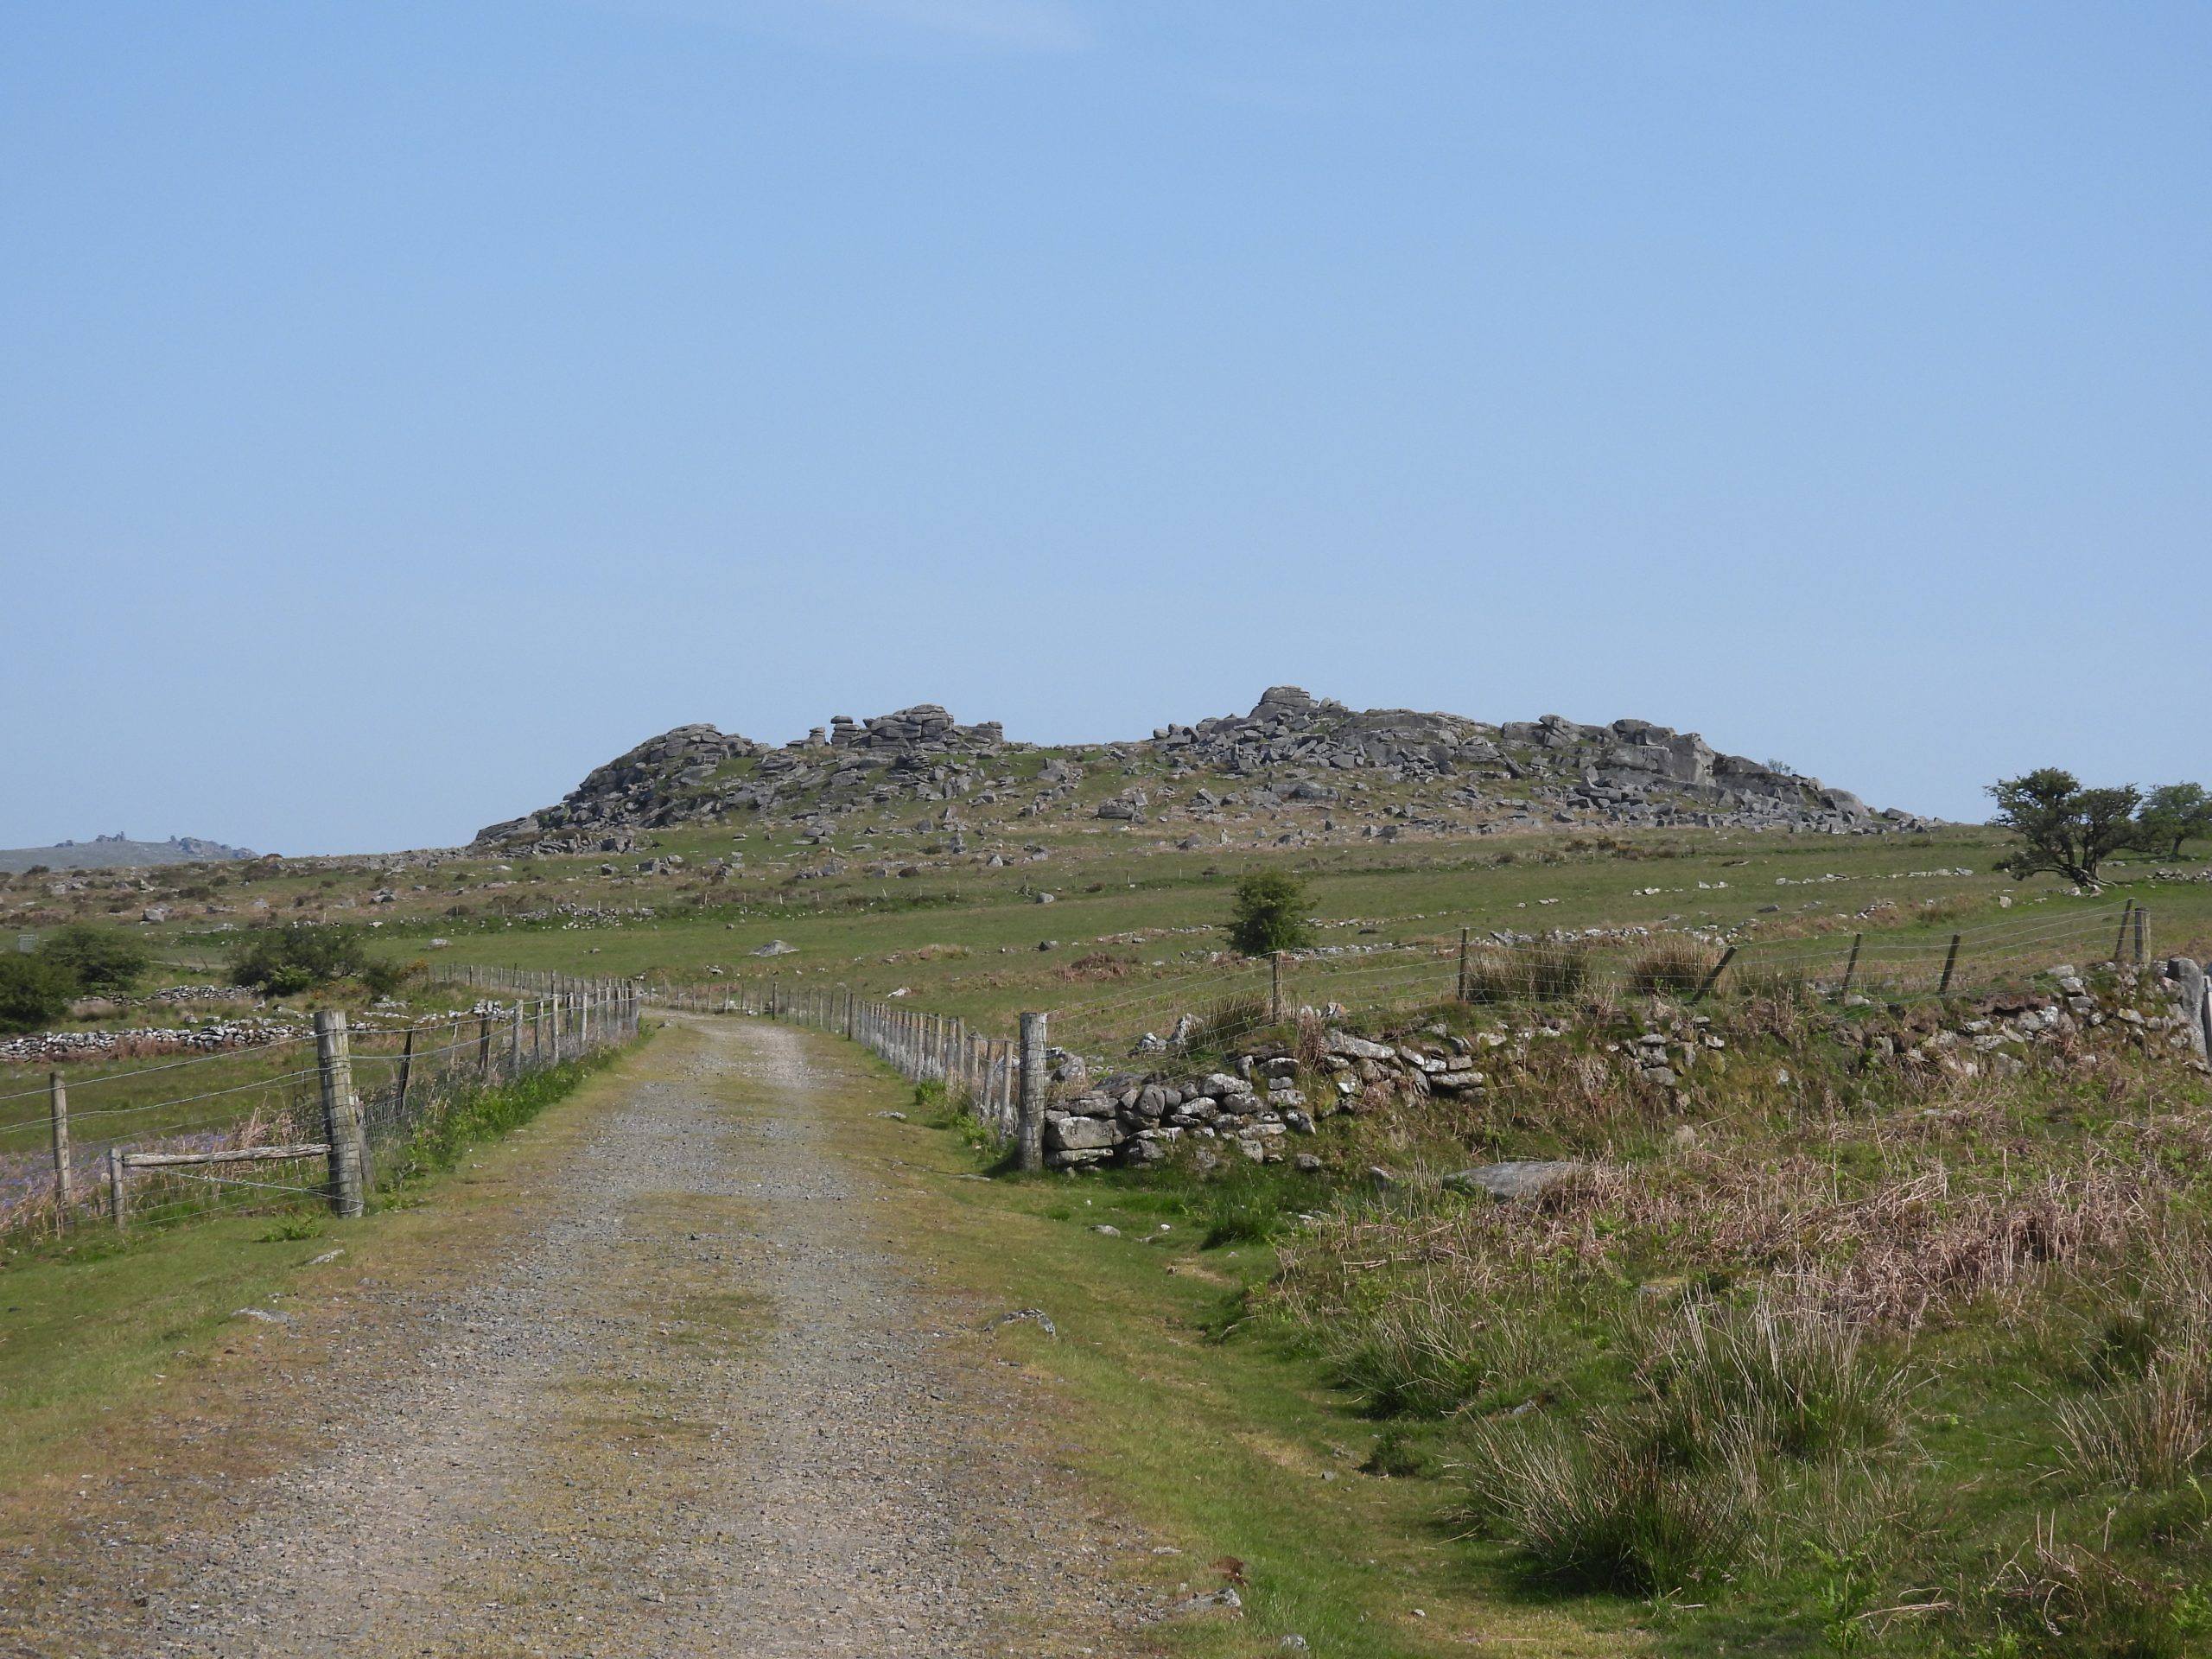 14. Routrundle walls and Ingra Tor